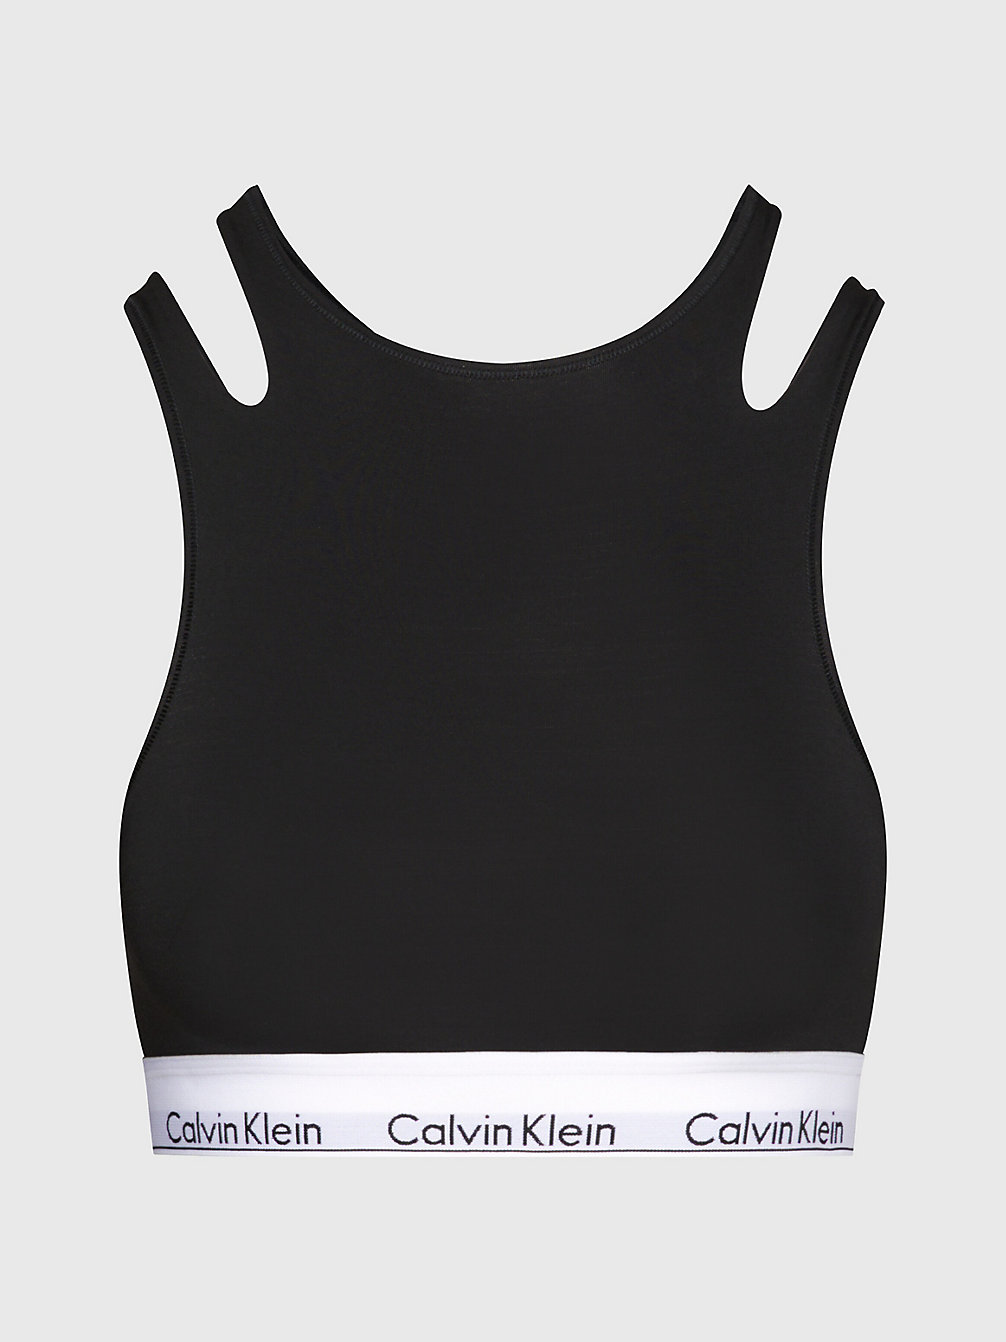 Corpiño - CK Deconstructed > BLACK > undefined mujer > Calvin Klein